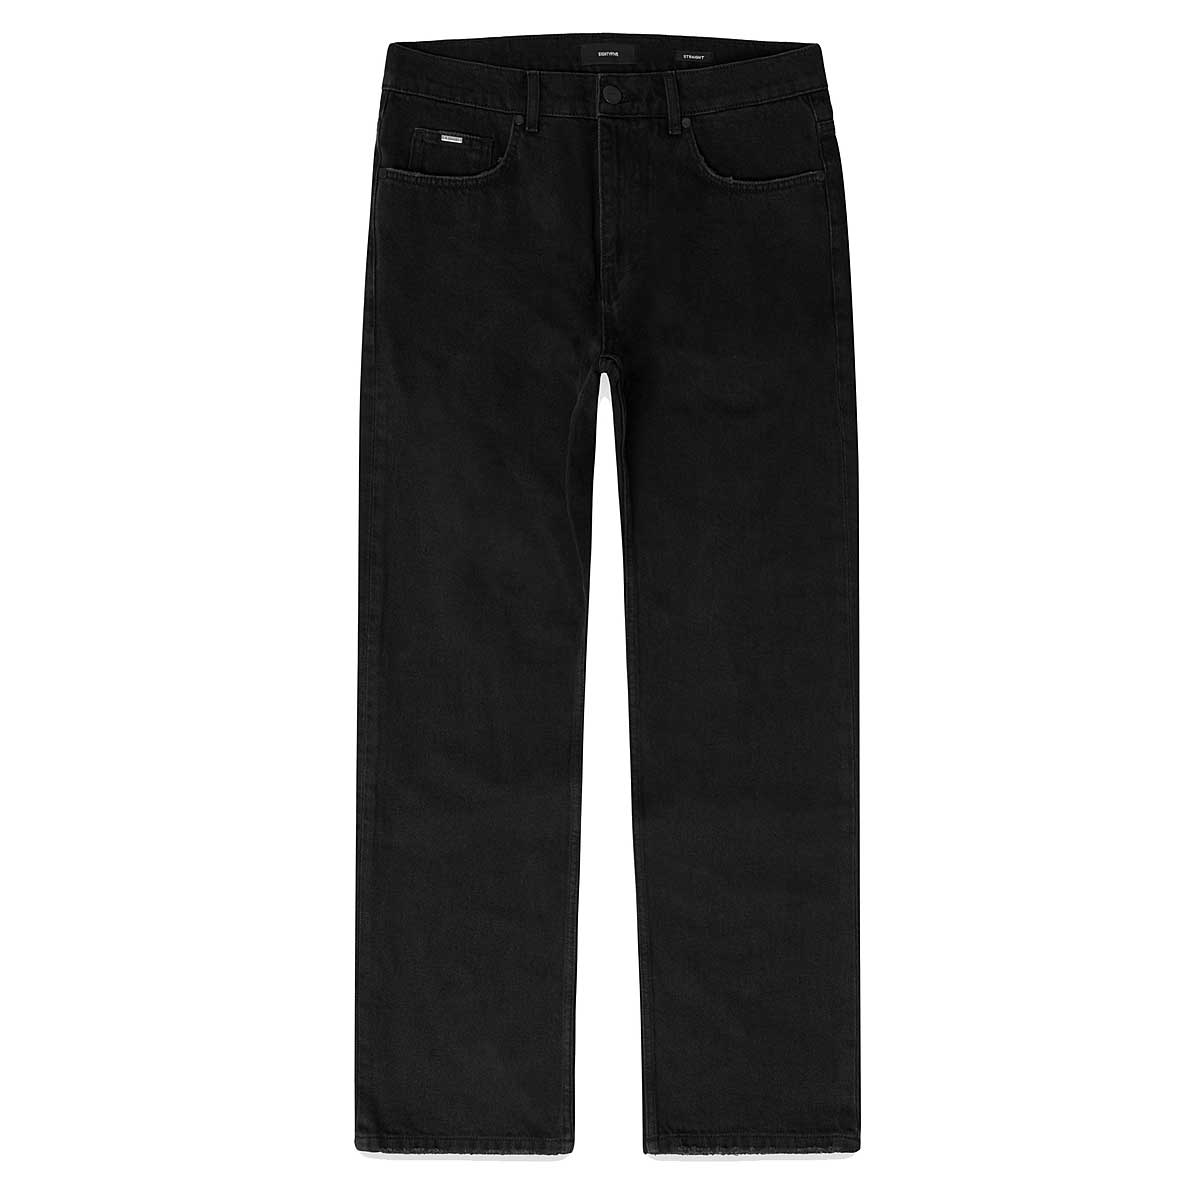 Eightyfive Distressed Jeans, Black Washed